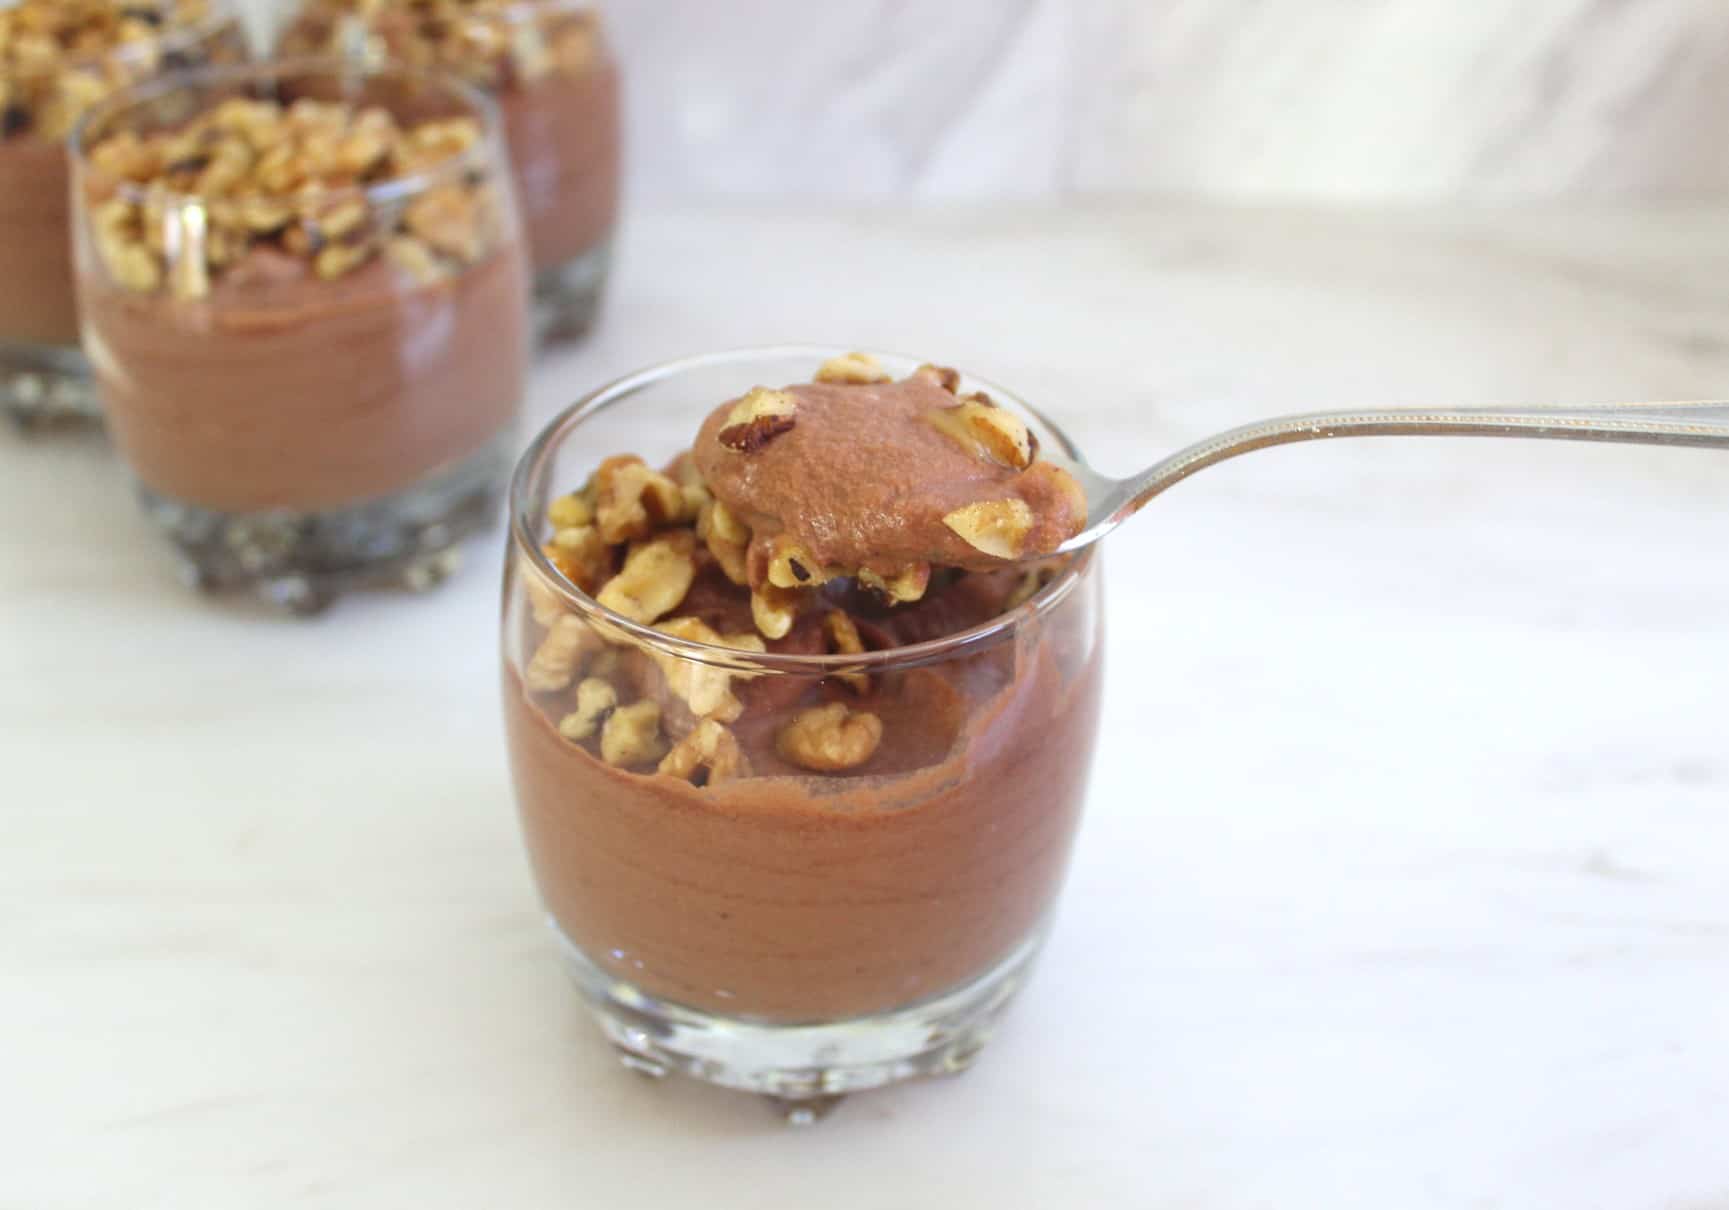 A spoonful of chocolate mousse and chopped nuts coming out of a jar.